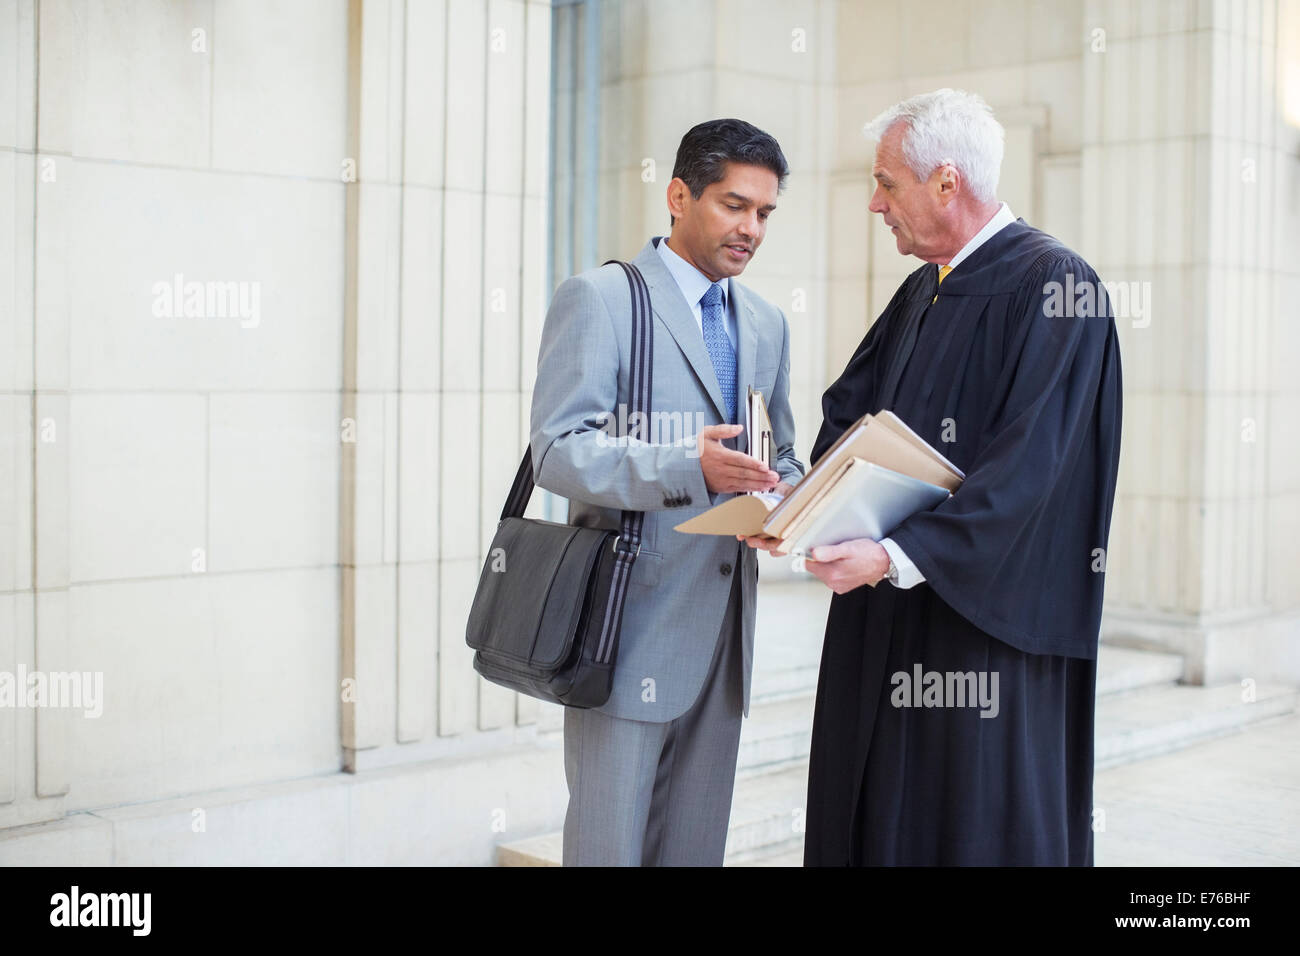 Judge and lawyer examining documents in courthouse Stock Photo